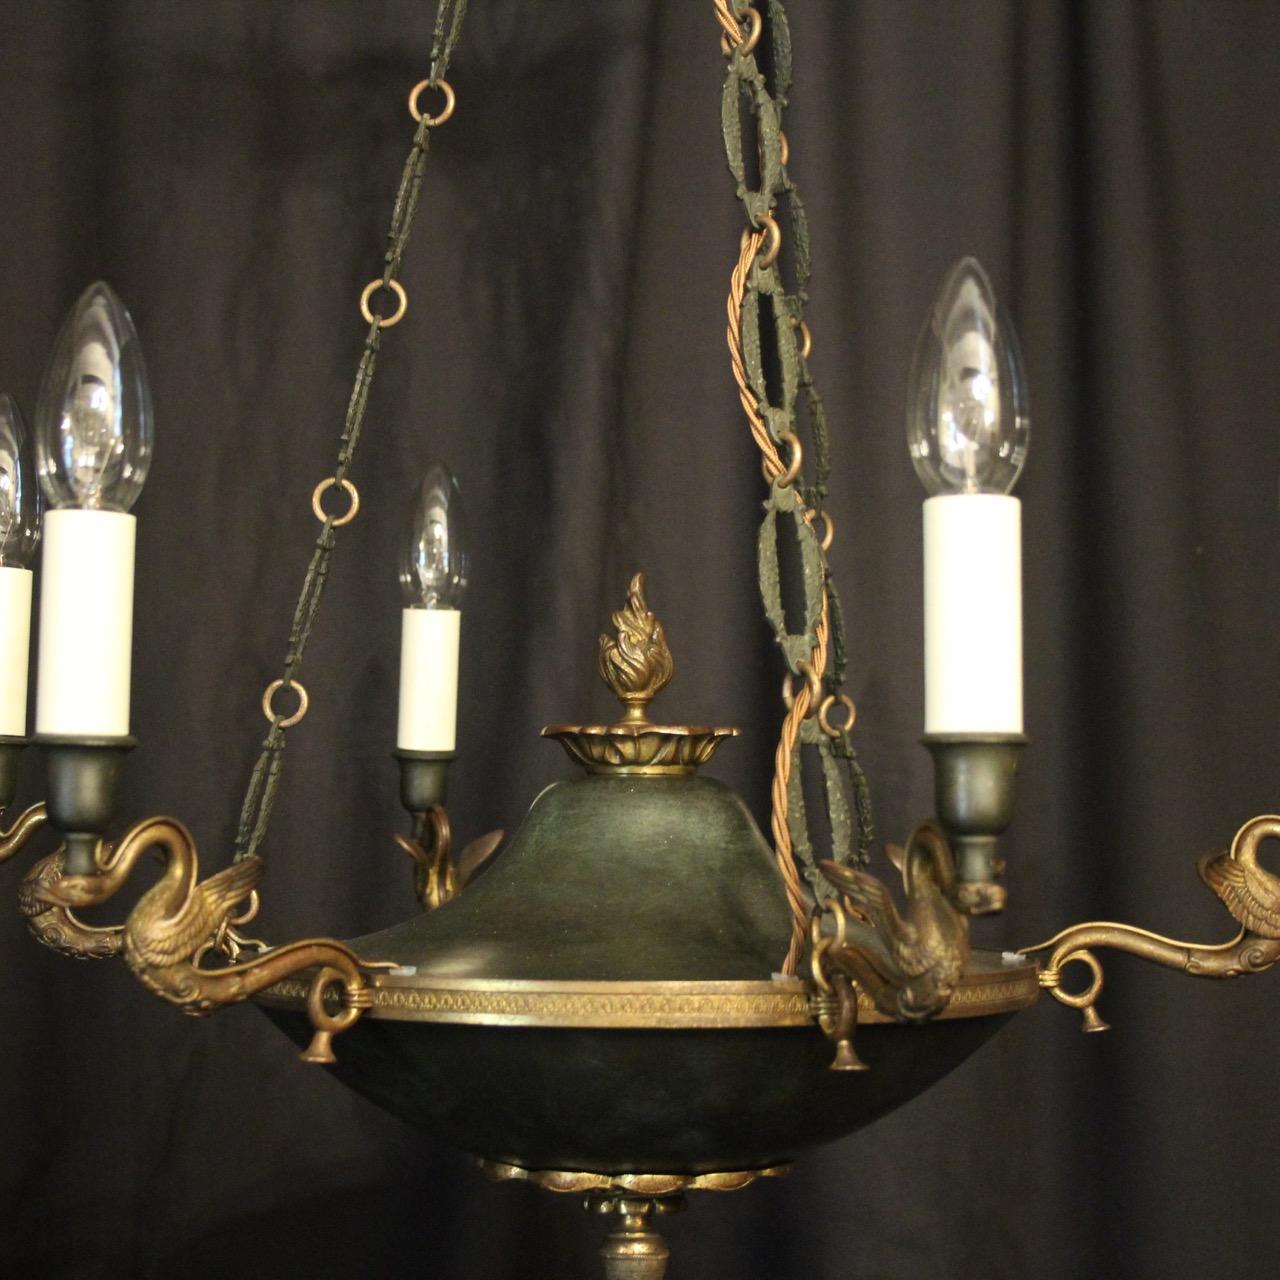 A French Empire gilded bronze and dark green enamelled 6-light antique chandelier, the decorative winged swan scrolling arms with bulbous enamelled candle sconces, issuing from an ornate Anthemion etched circular band with acorn base, flame centre